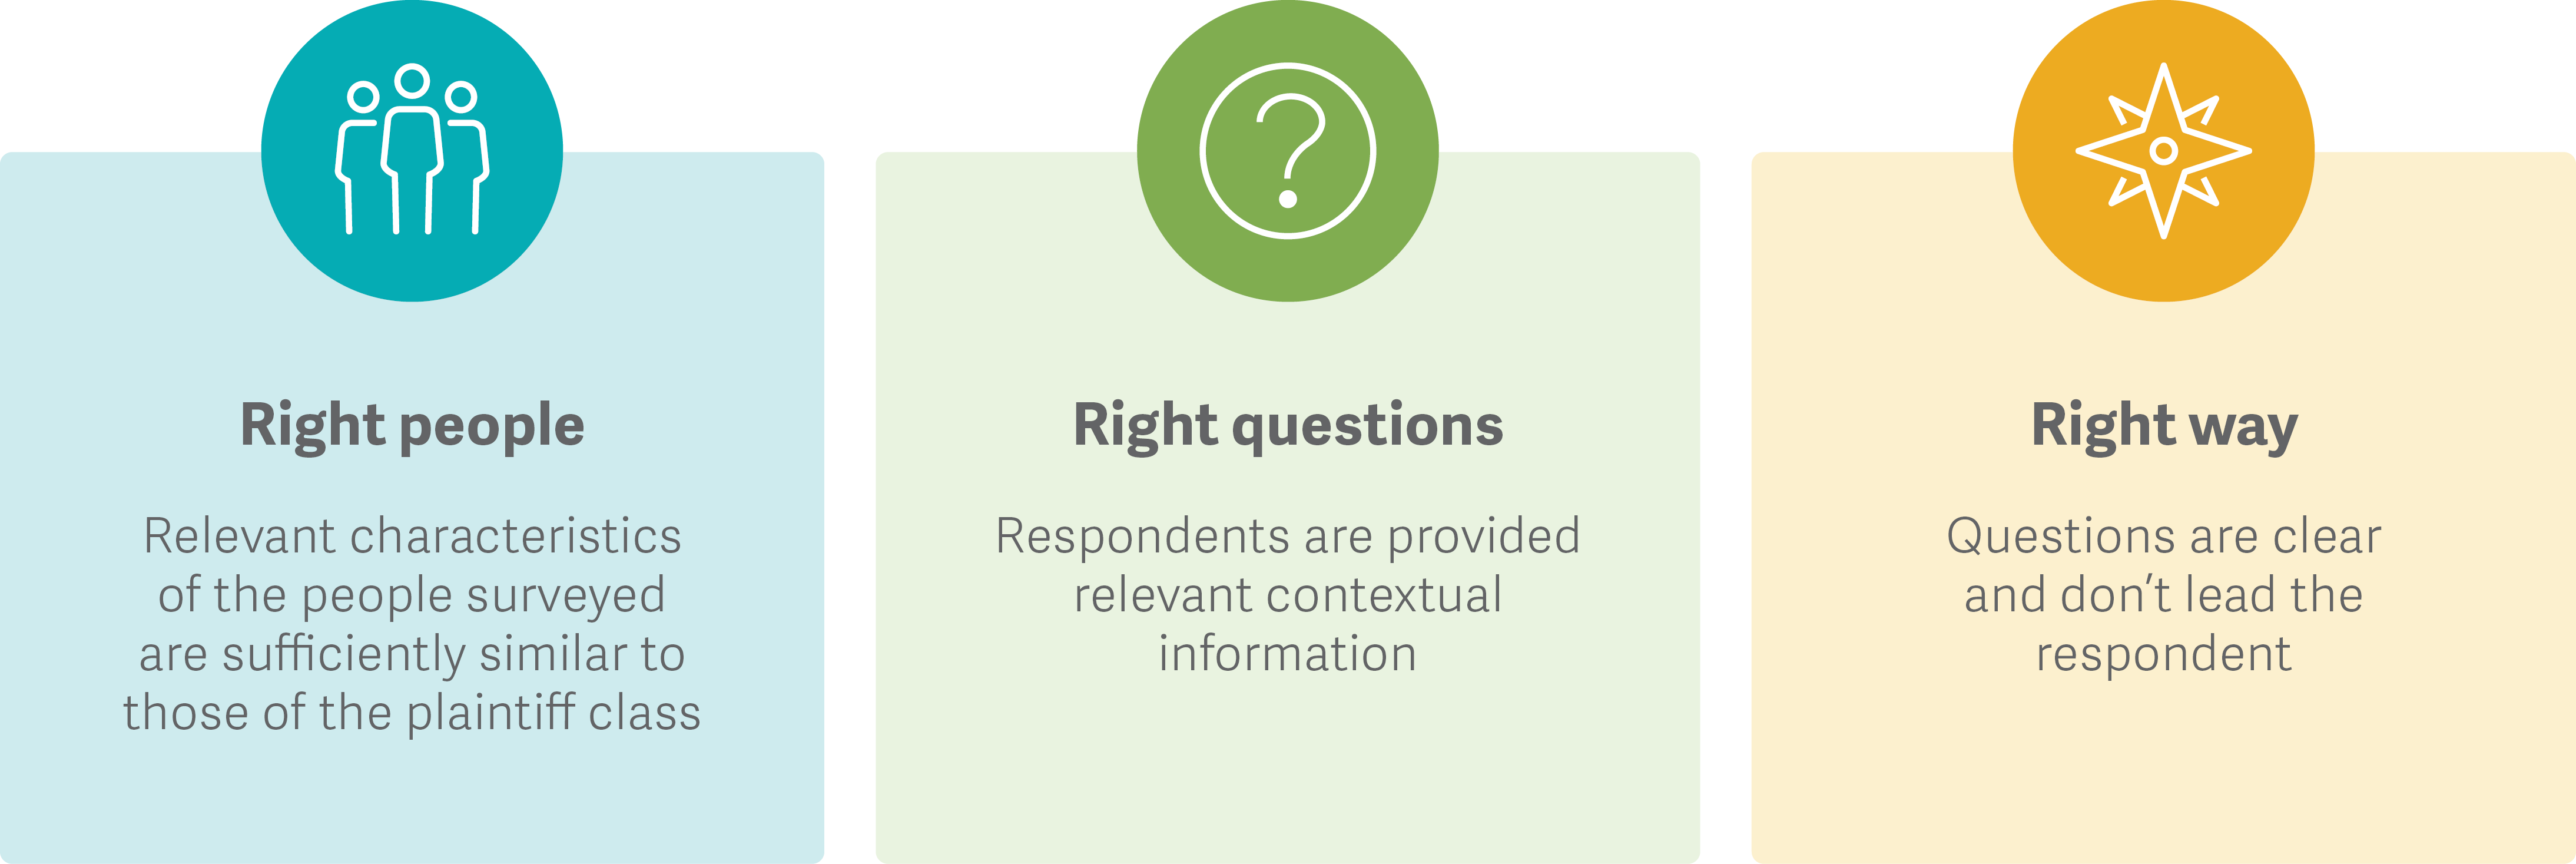 Right people: Relevant characteristics of the people surveyed are sufficiently similar to those of the plaintiff class; Right questions: Respondents are provided relevant contextual information; Right way: Questions are clear and don’t lead the respondent